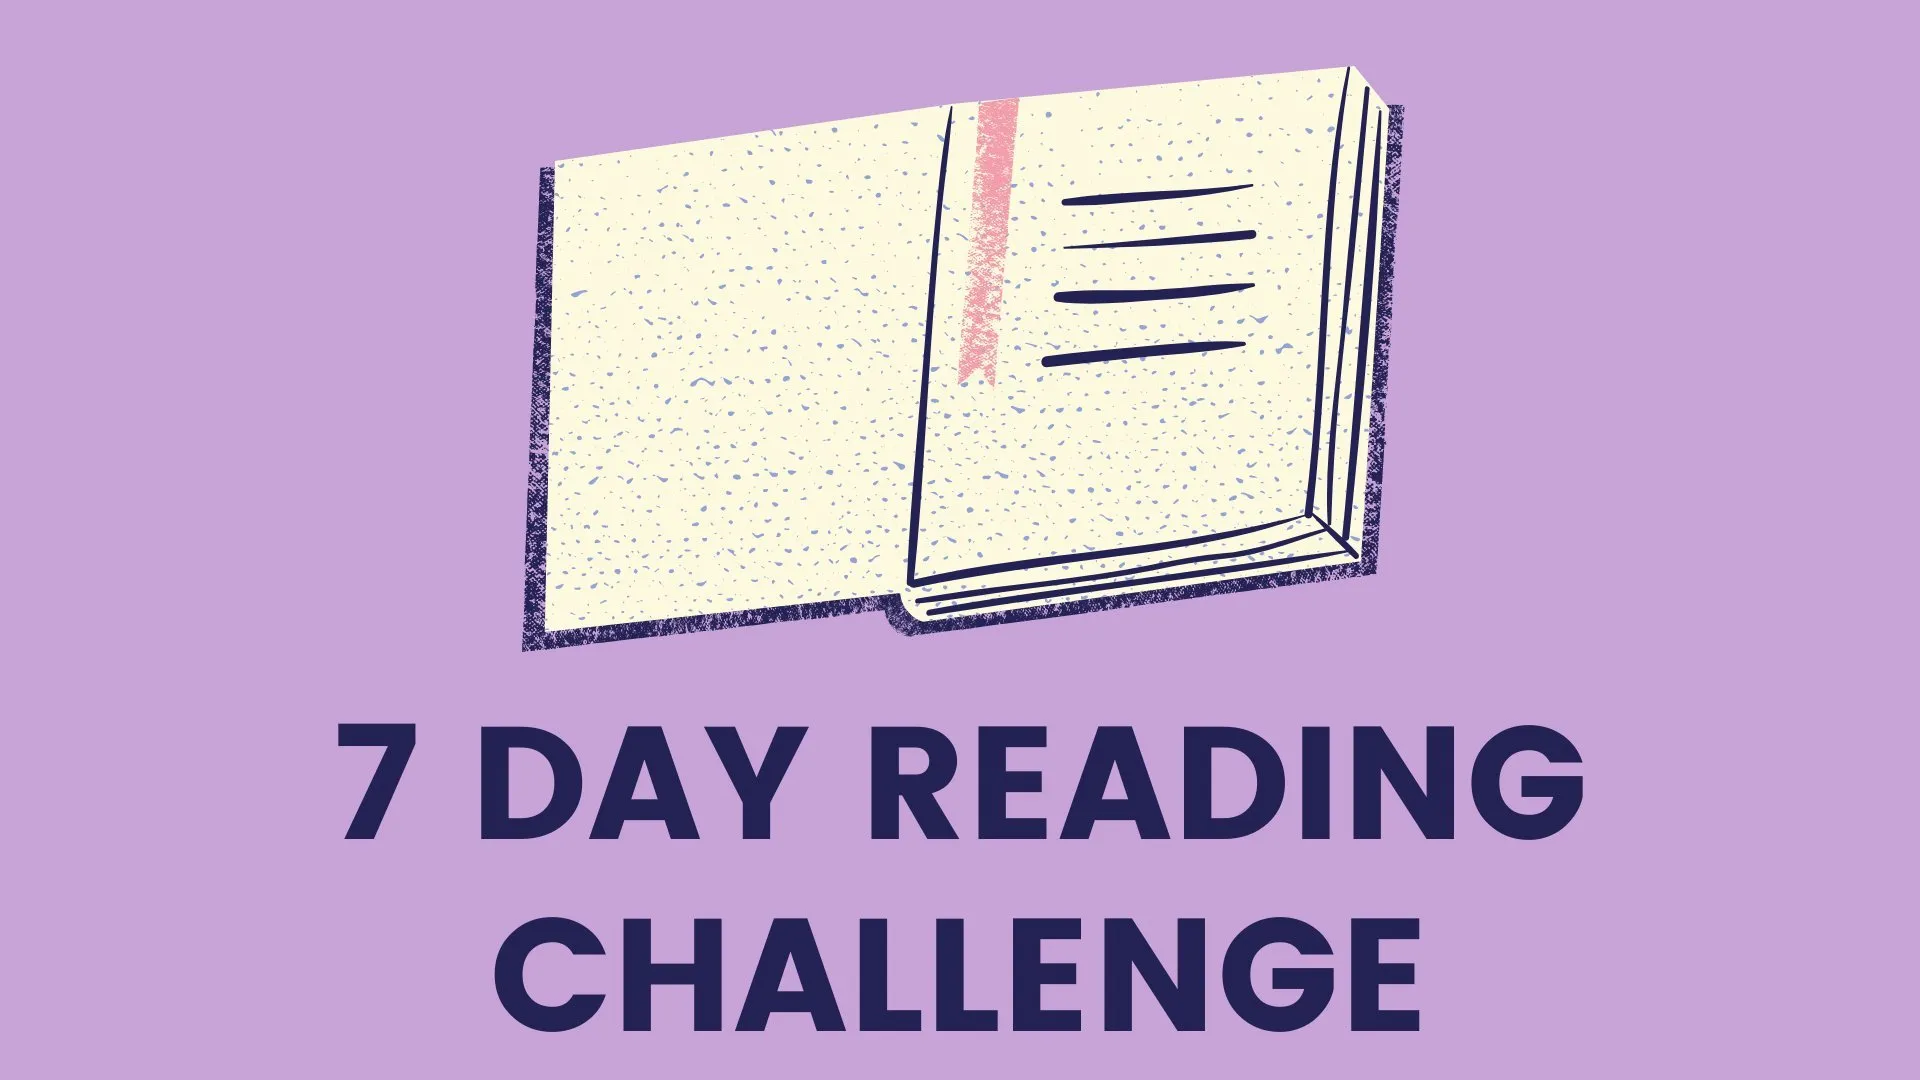 How to Read more Books 7 Day Reading Challenge